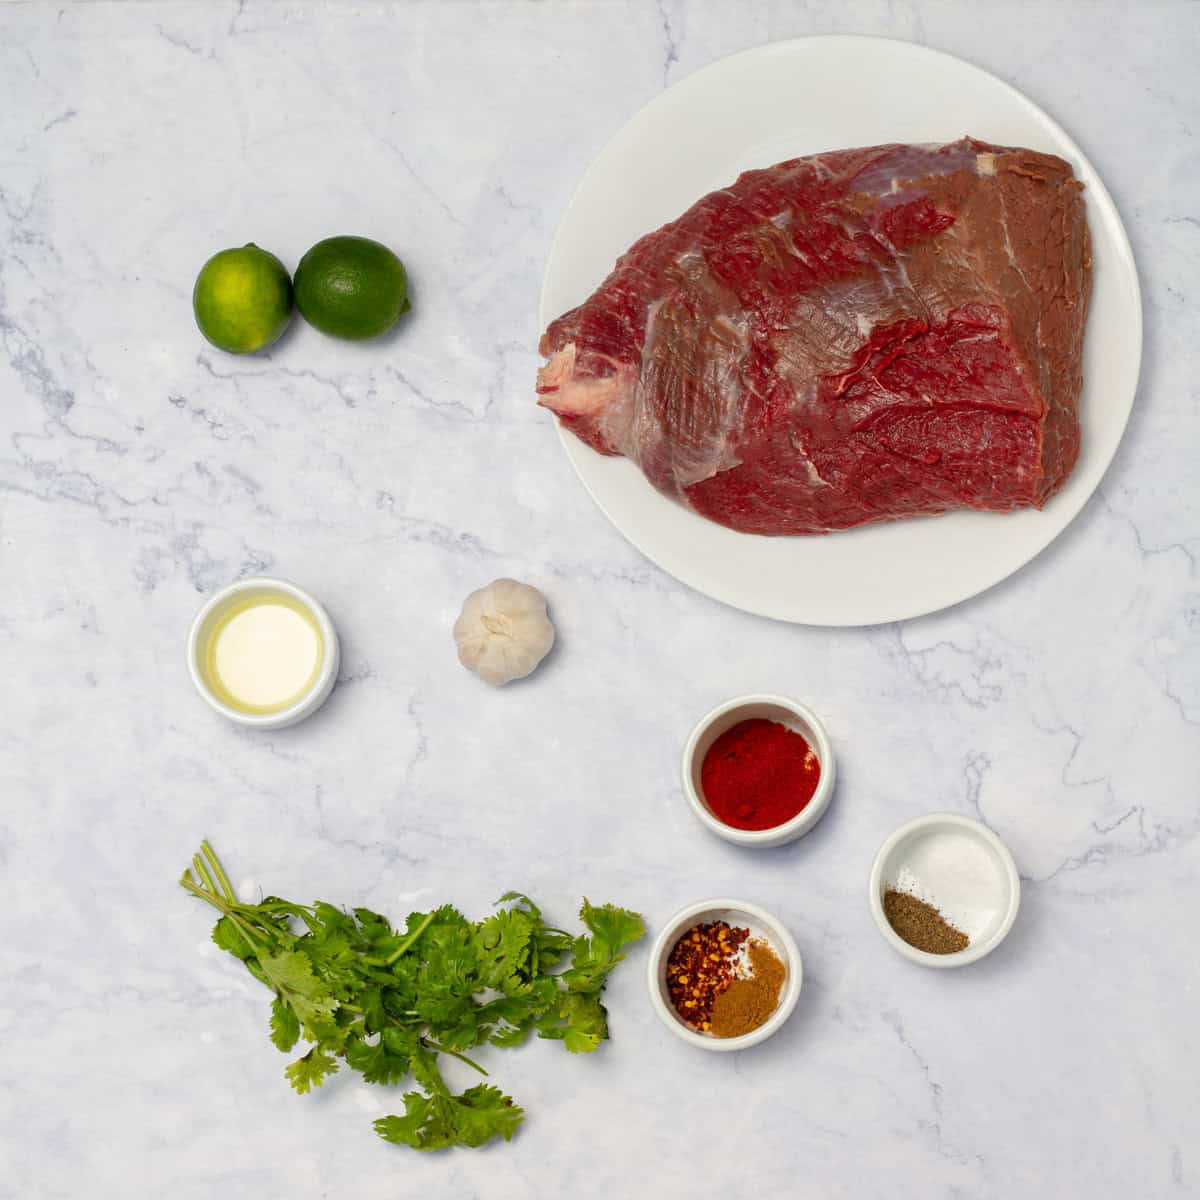 Carne asada ingredients of round steak, fresh cilantro, seasonings, limes, and oil in separate dishes. 